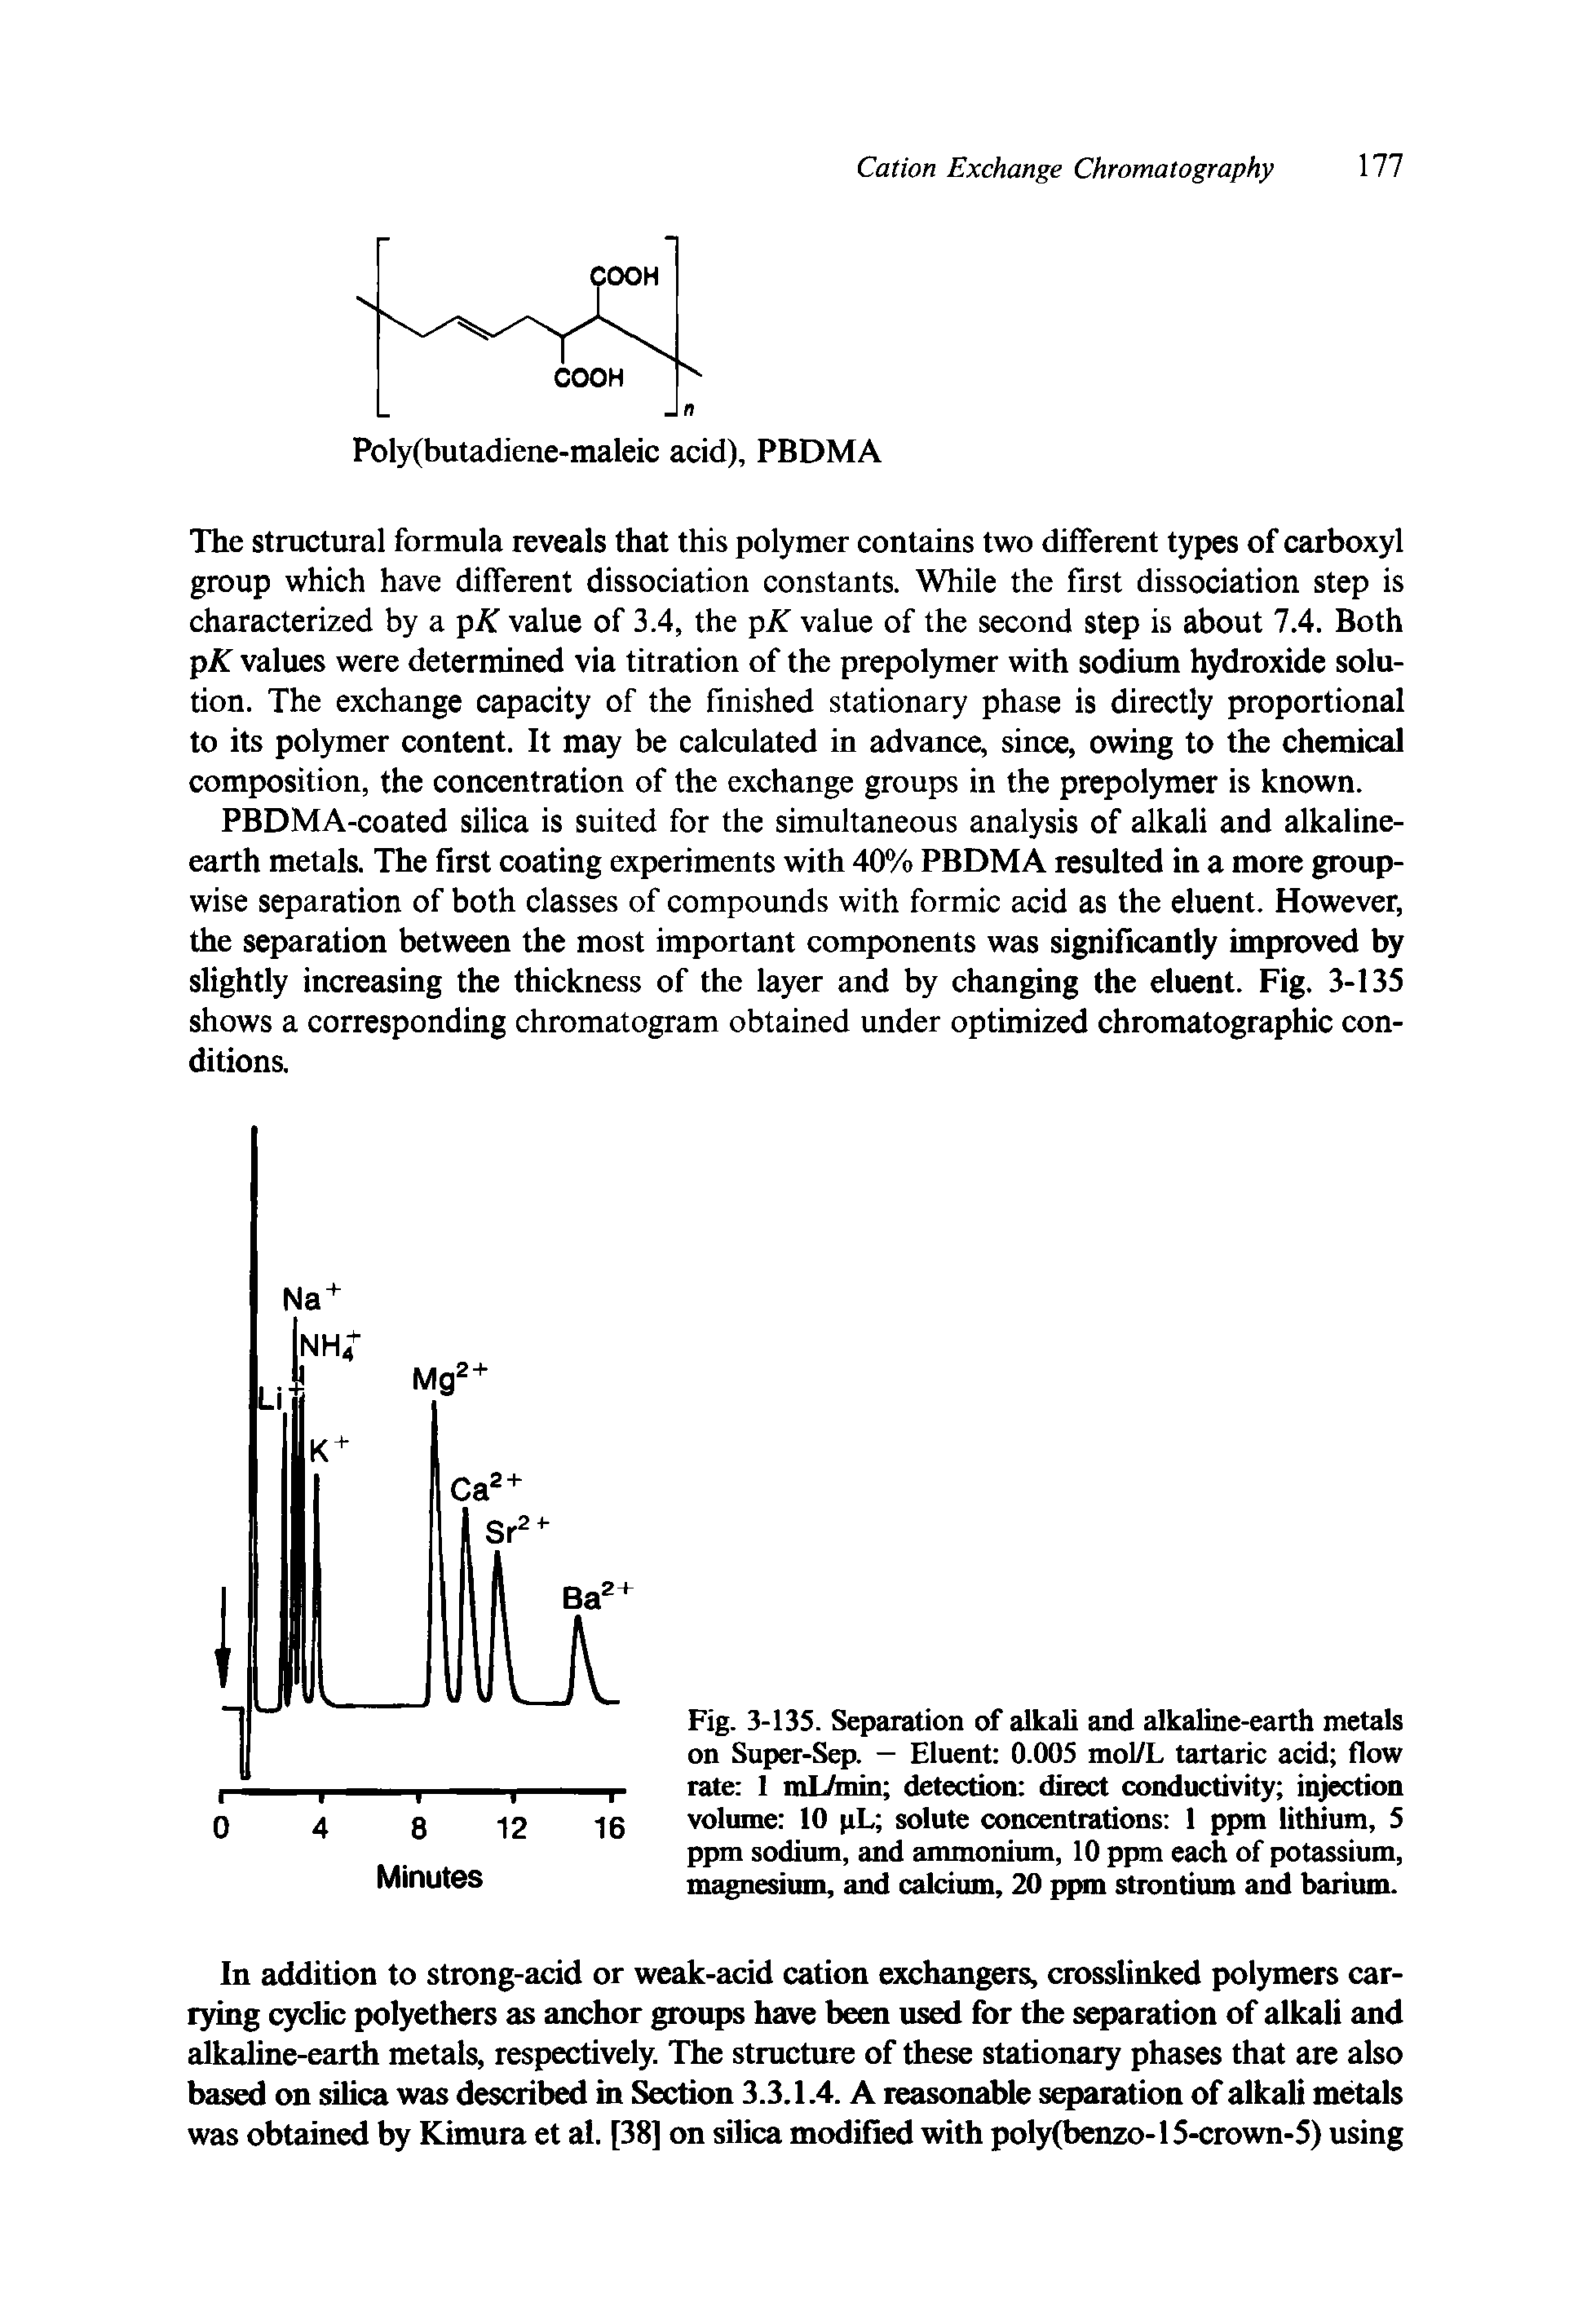 Fig. 3-135. Separation of alkali and alkaline-earth metals on Super-Sep. — Eluent 0.005 mol/L tartaric acid flow rate 1 mL/min detection direct conductivity injection volume 10 pL solute concentrations 1 ppm lithium, 5 ppm sodium, and ammonium, 10 ppm each of potassium, magnesium, and calcium, 20 ppm strontium and barium.